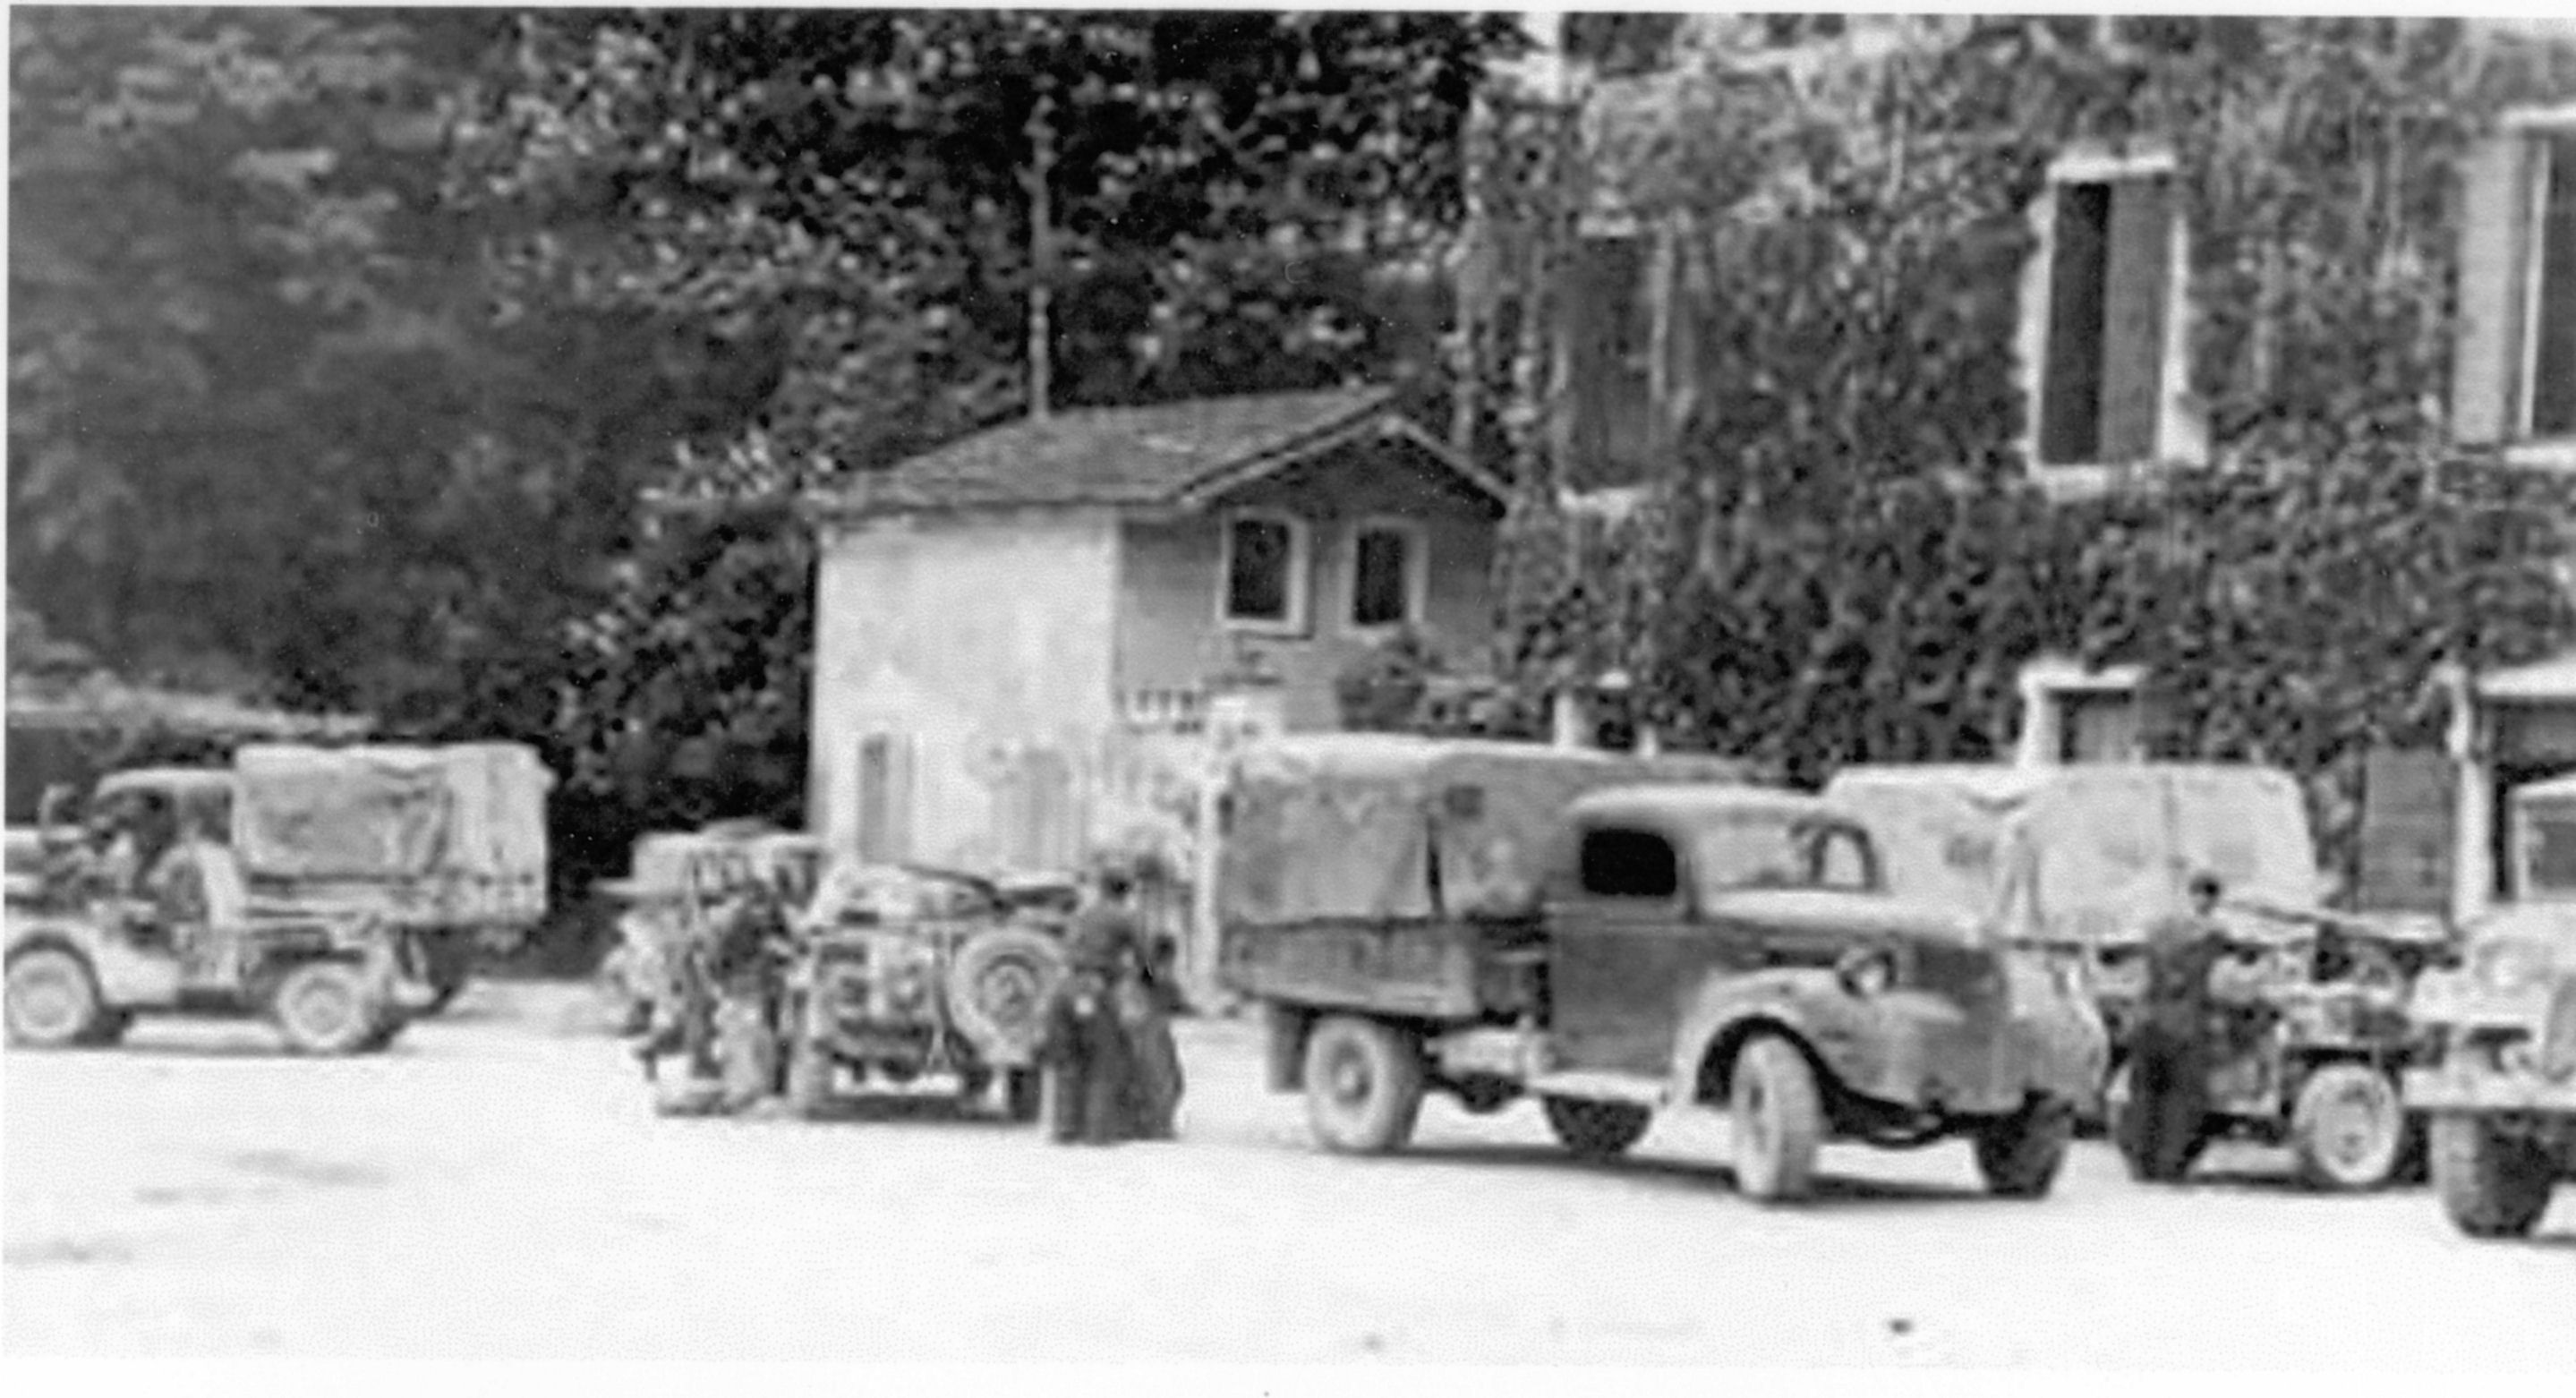 PPA vehicles in Italy